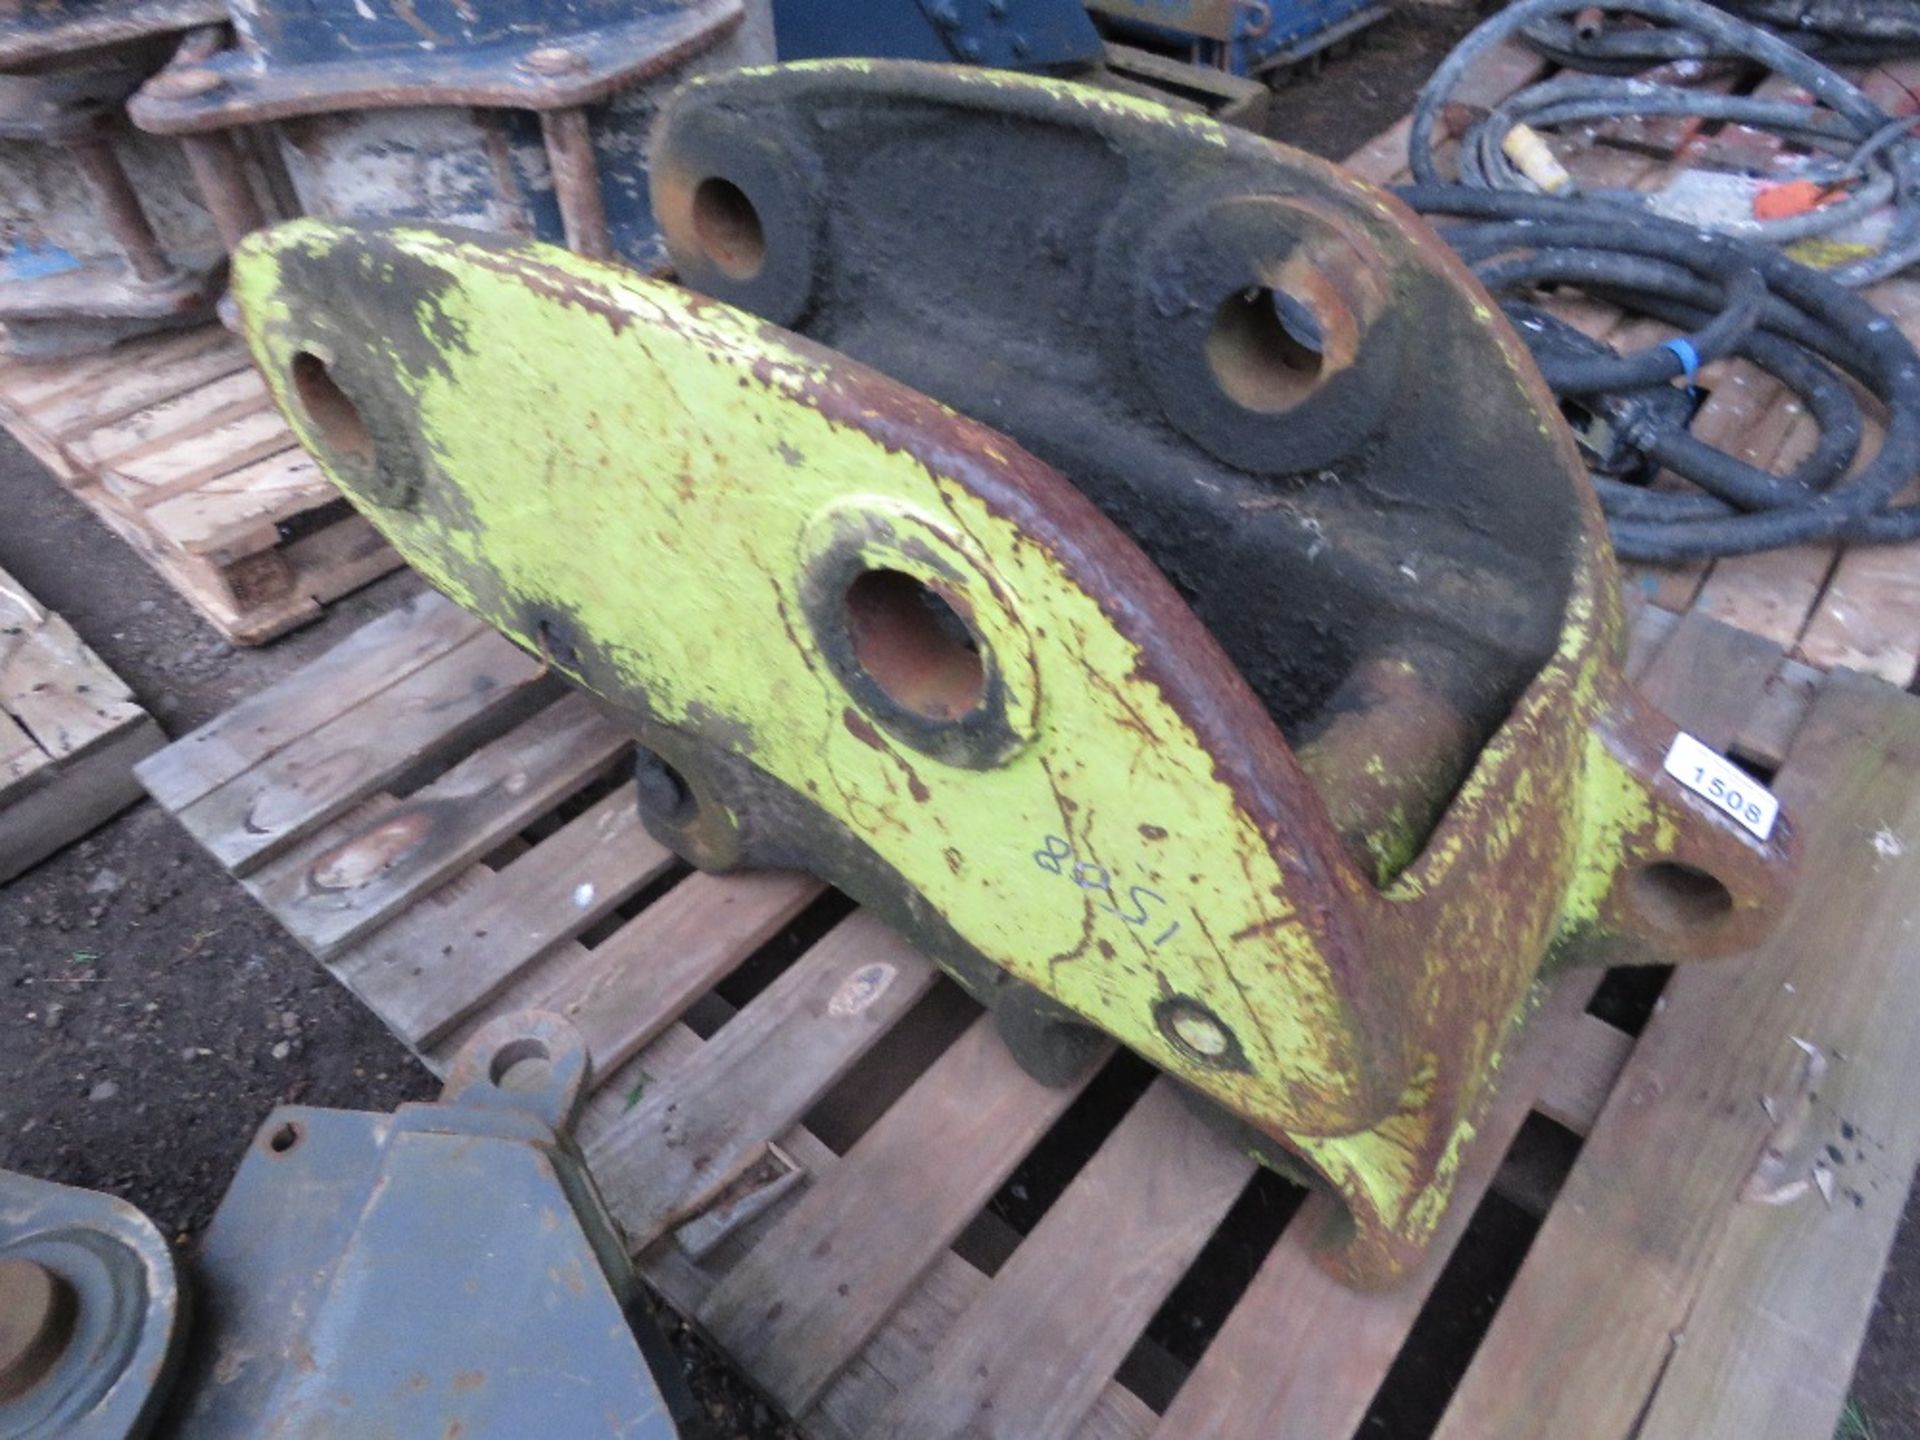 HYDRAULIC EXCAVATOR HITCH ON 80MM PINS. UNTESTED.